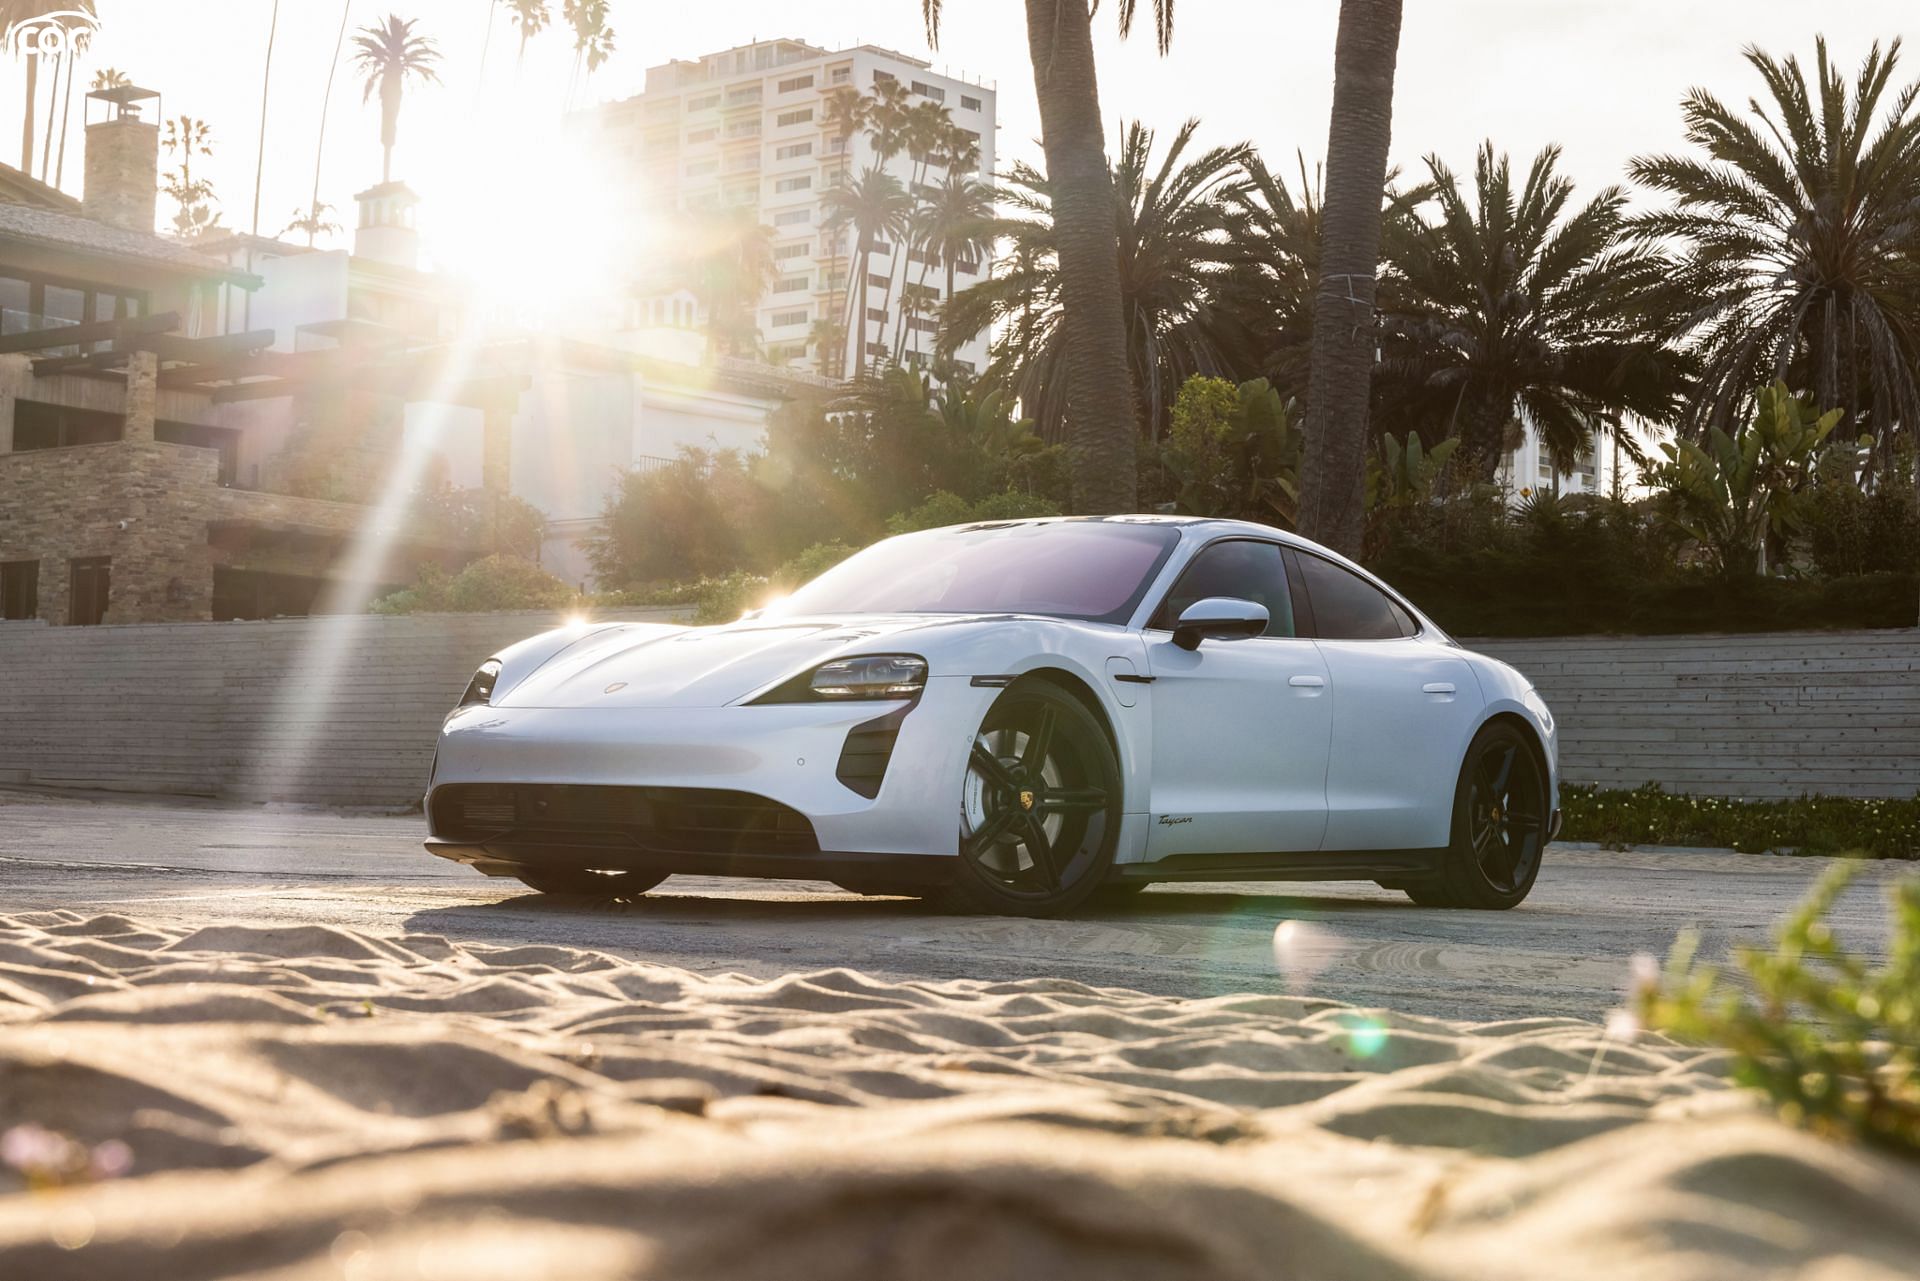 The All Electric Porsche Taycan Outsells Flagship Porsche 911 In The Past Year